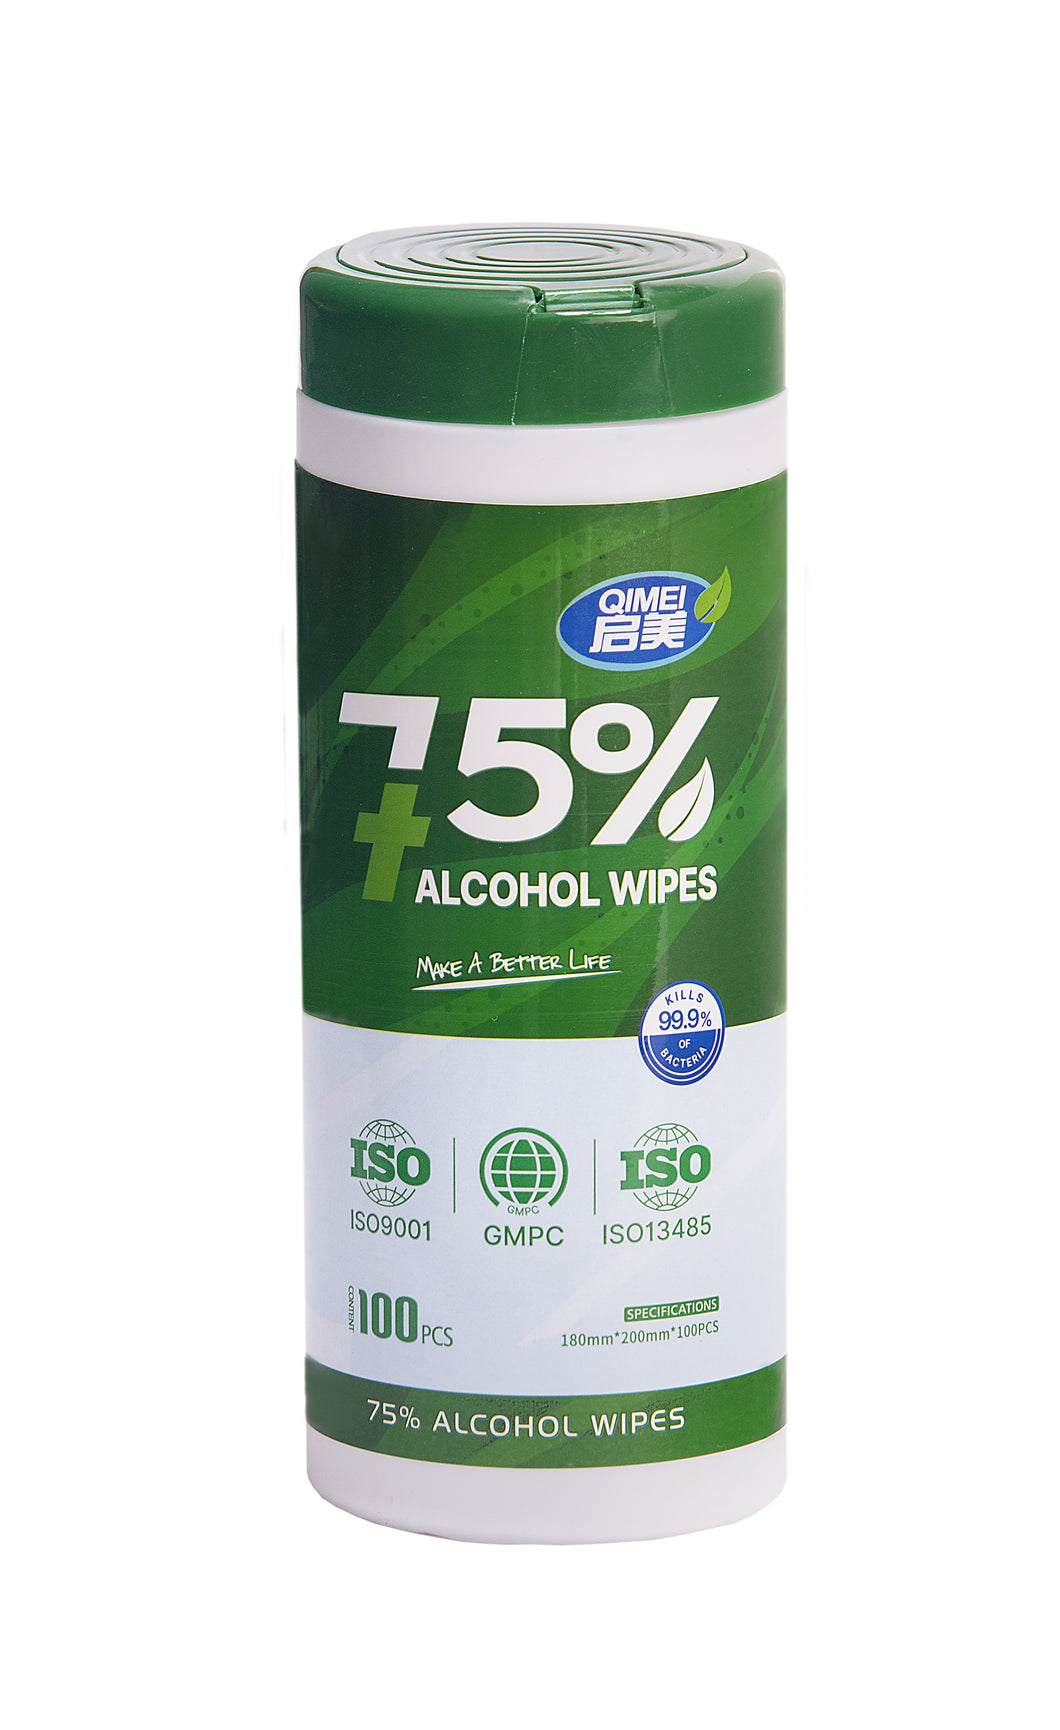 sanitizing alcohol wipes, isopropyl alcohol in container. 100 wipes per pack